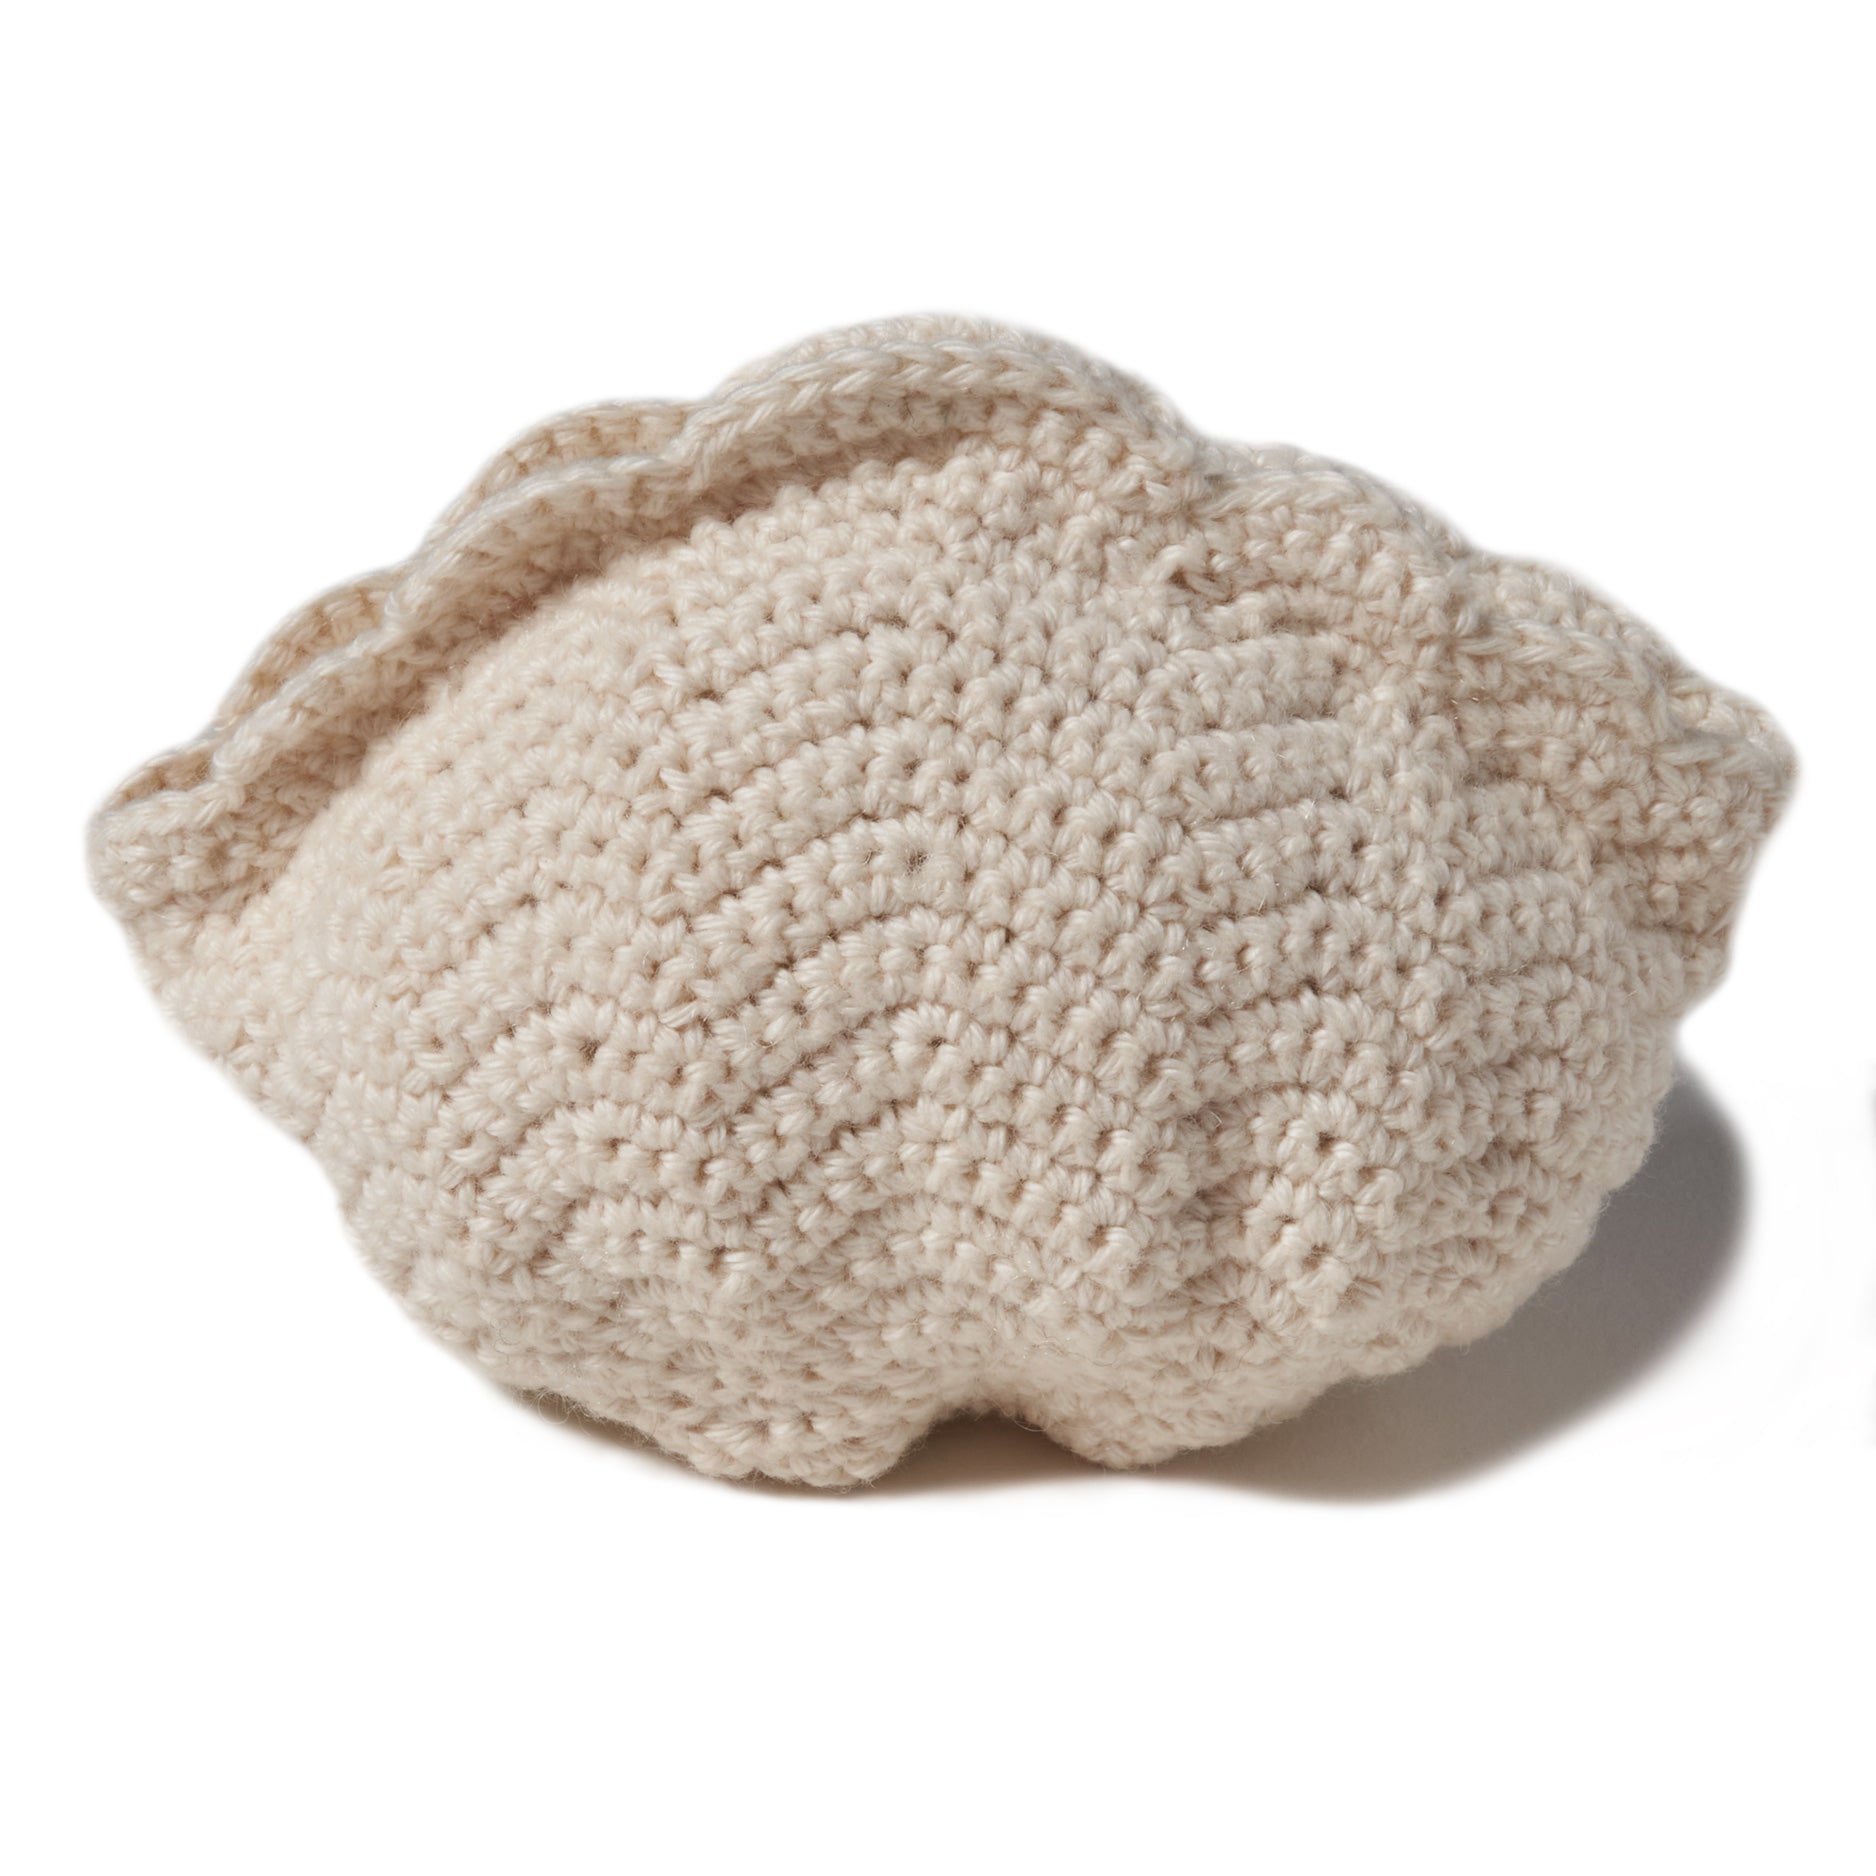 natural organic soft toy in the shape of a sea scallop shell with a rattle inside and at 5" in width.  100% organic cotton hand crochet knit.